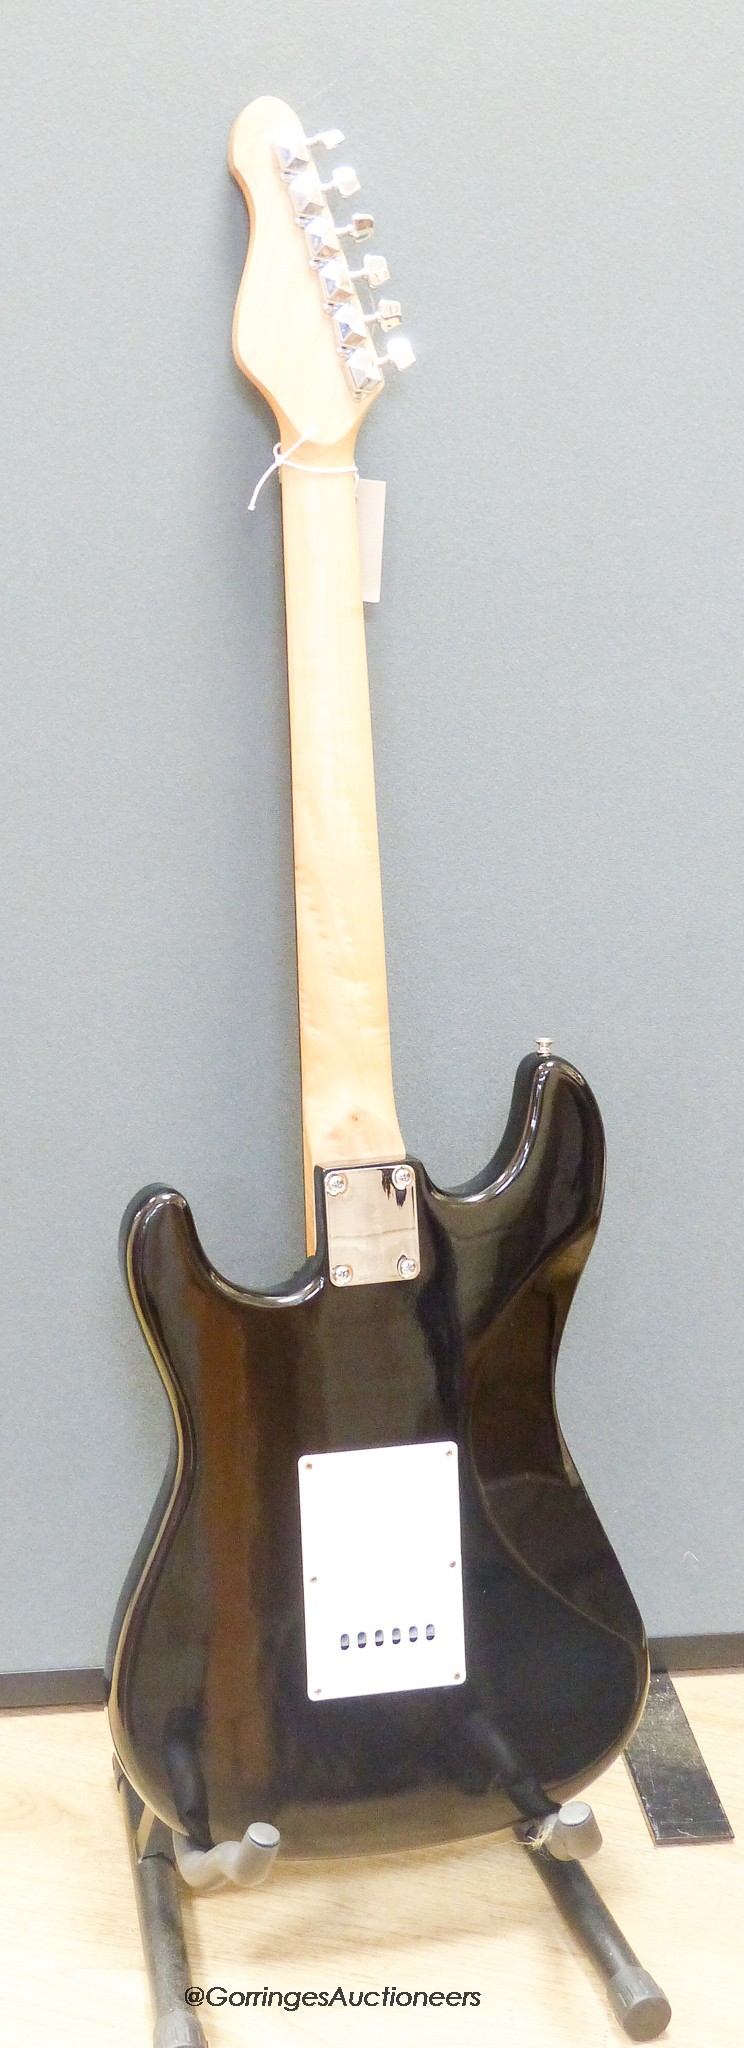 An Encore electric guitar with hard case